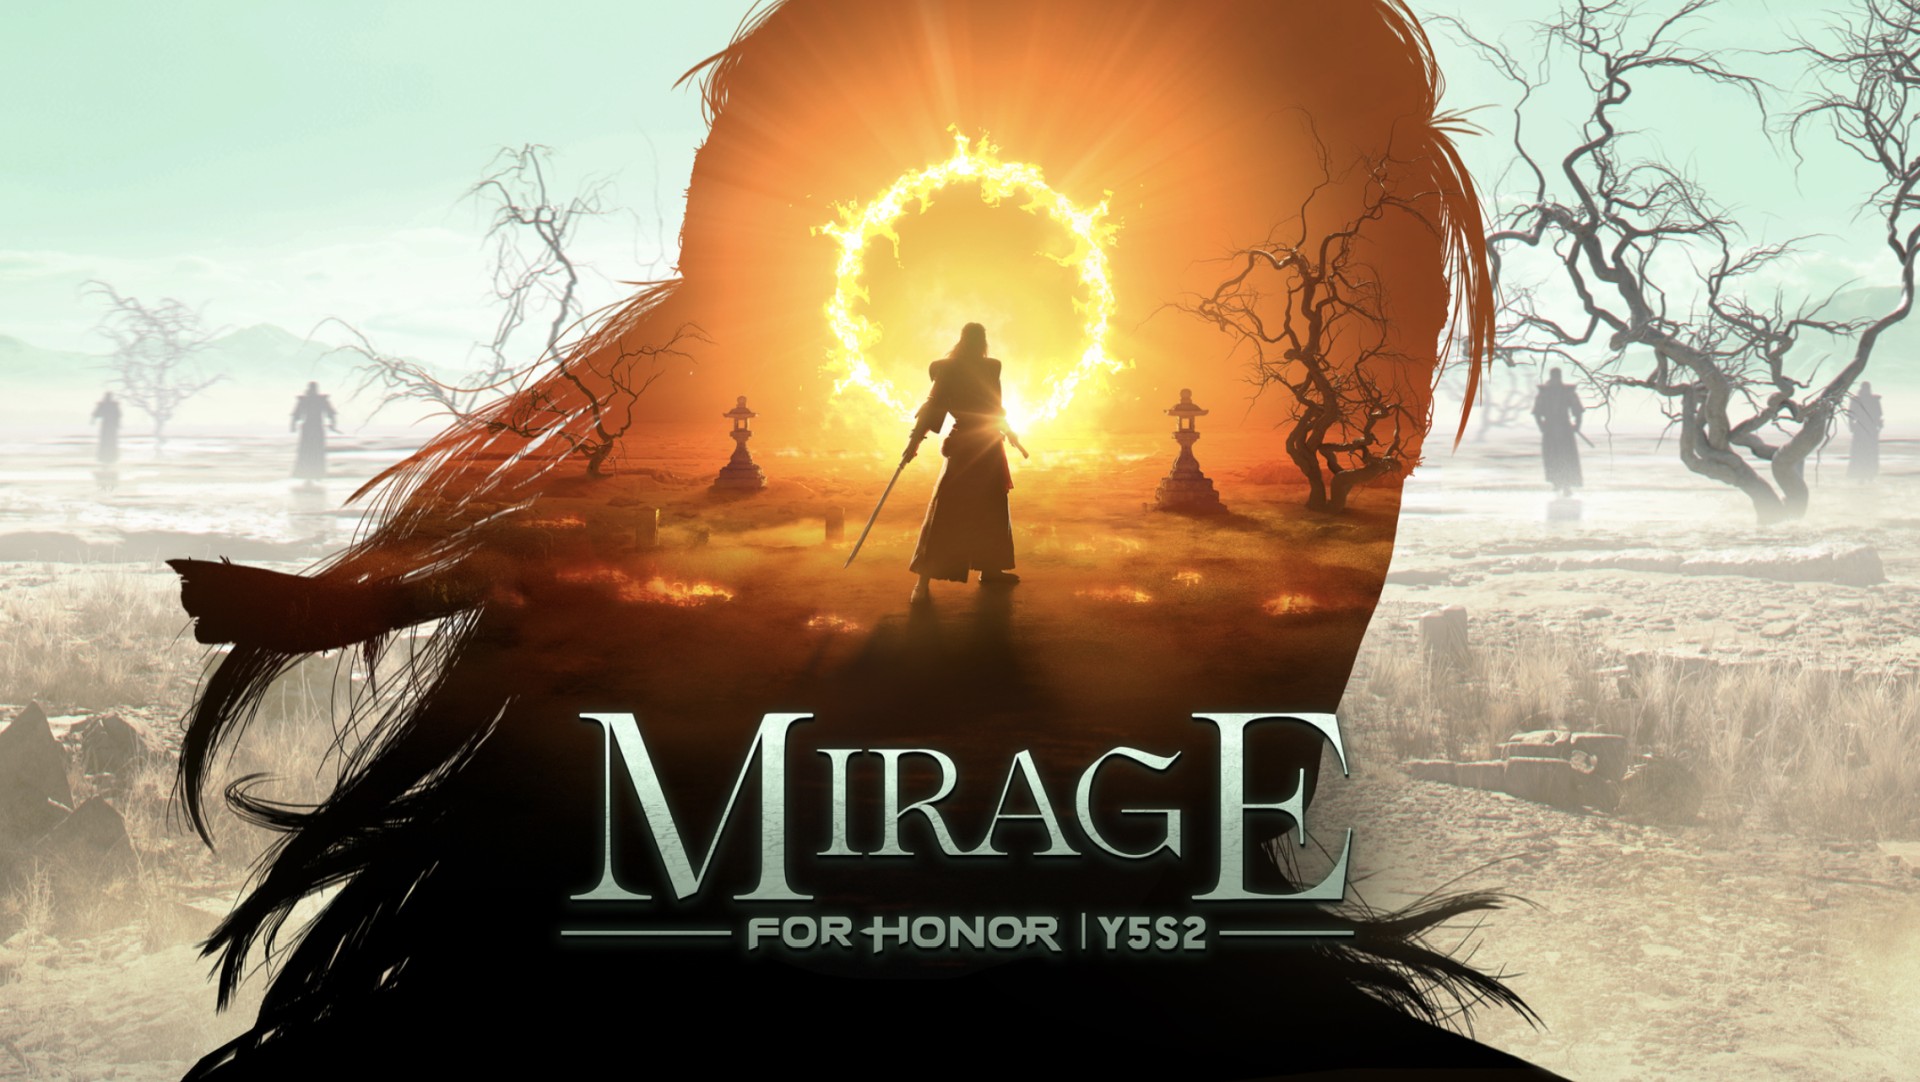 For Honor - Mirage Hero Image